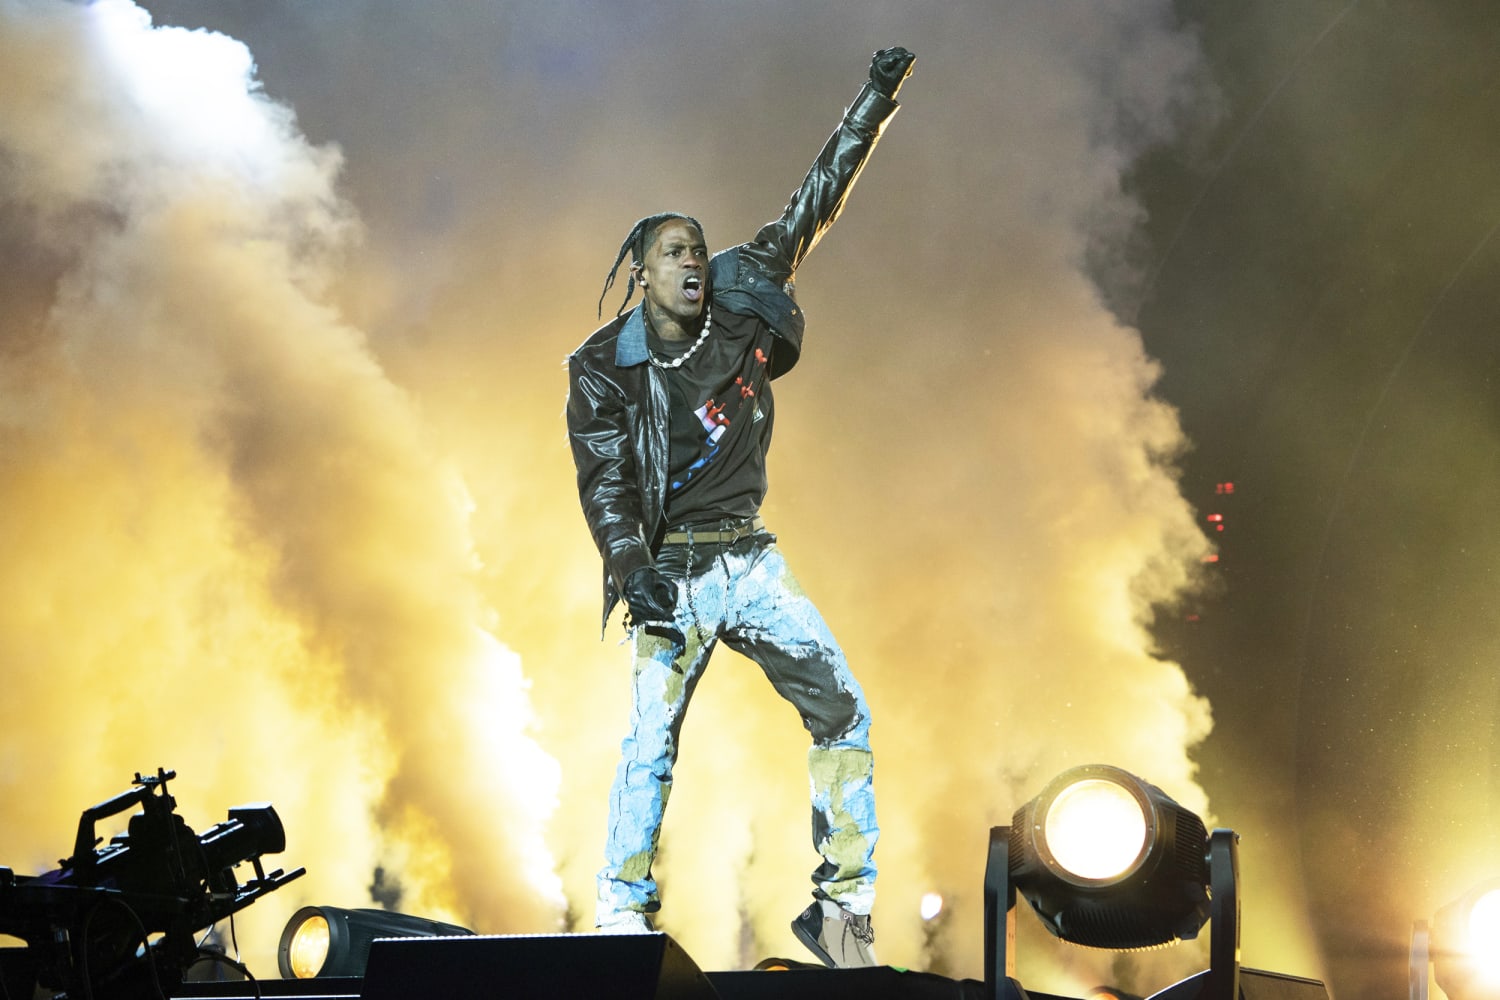 For Travis Scott, chaos is part of his show’s popular formula